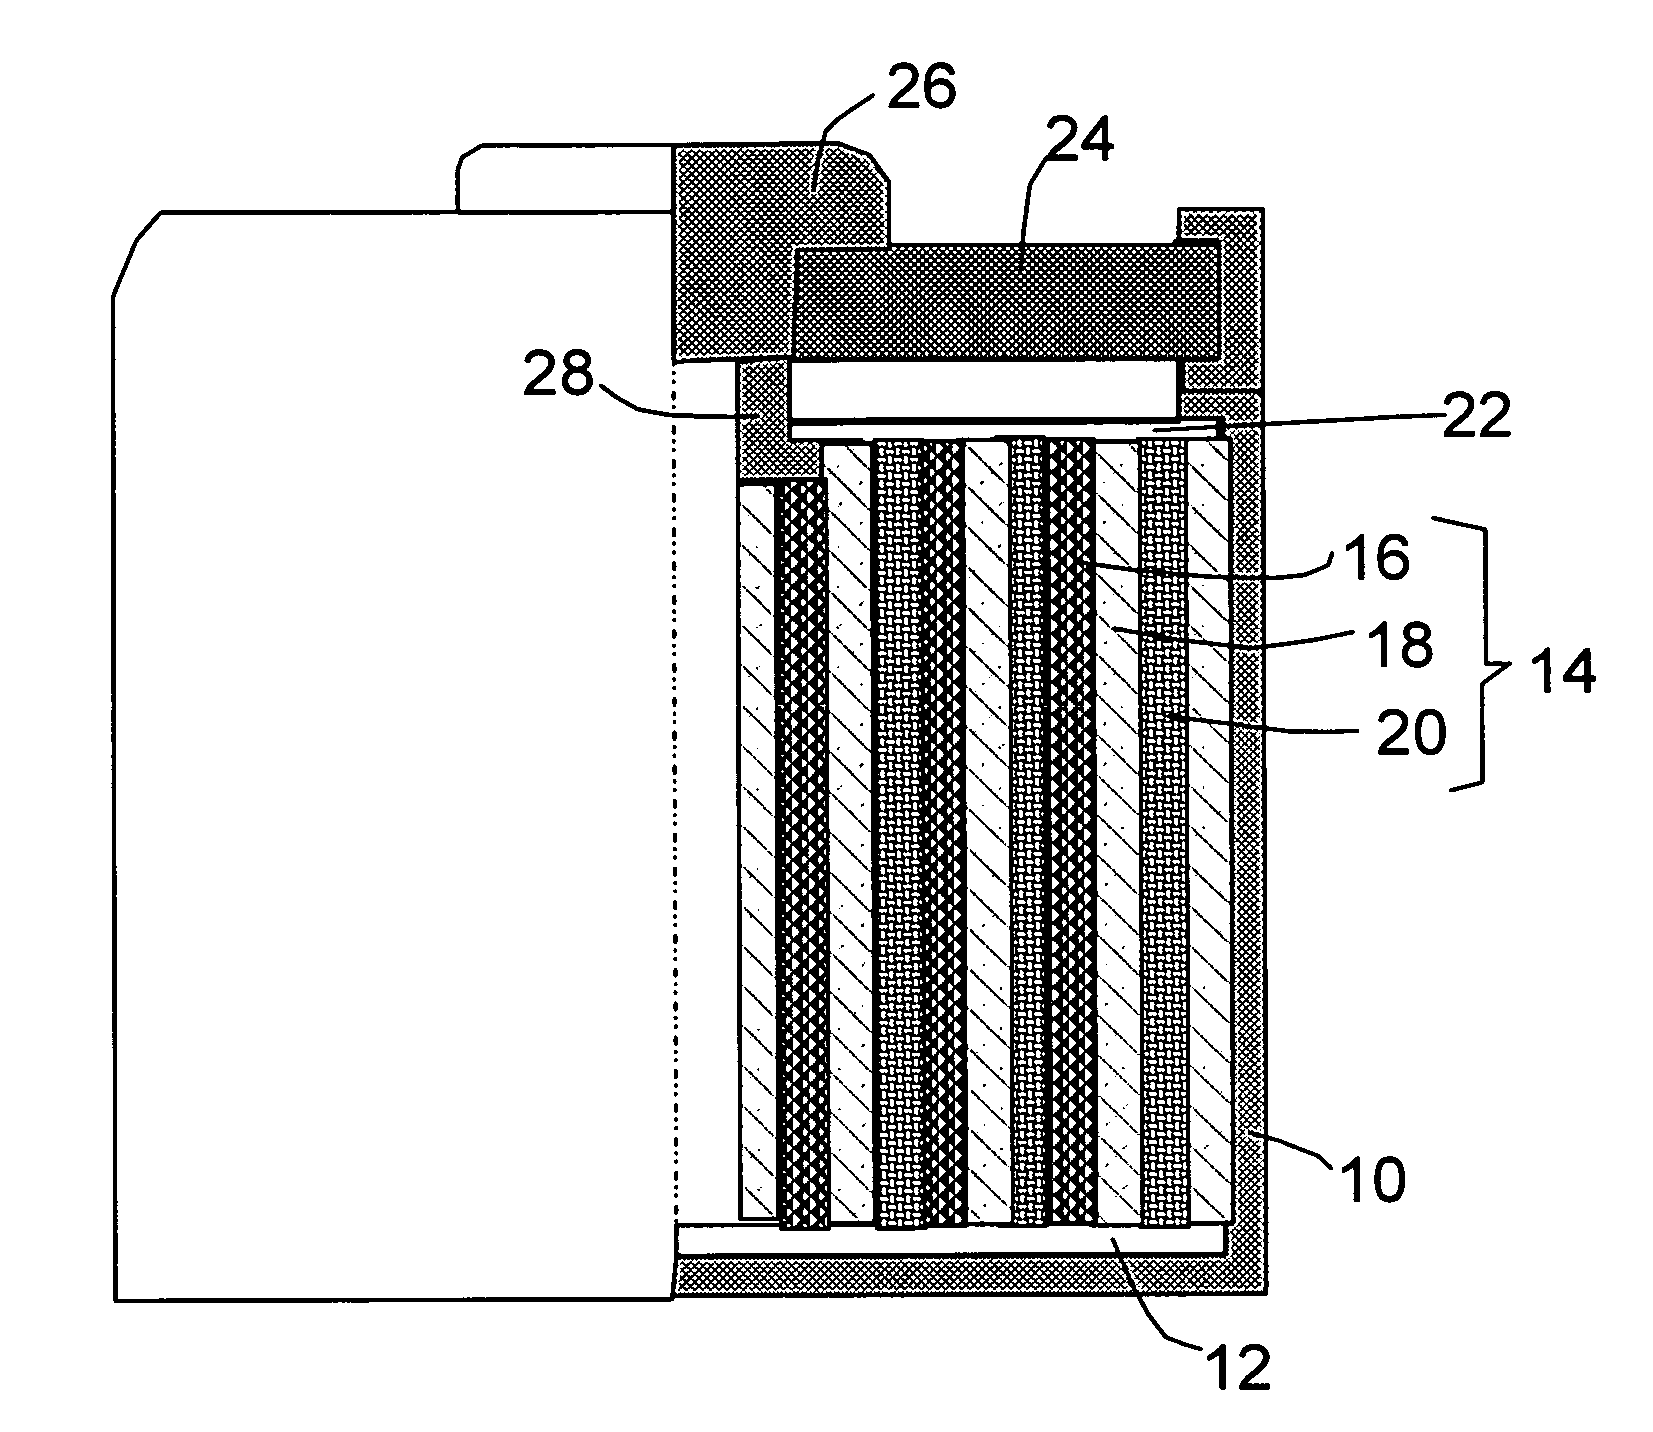 Hybrid nano-filament cathode compositions for lithium metal or lithium ion batteries